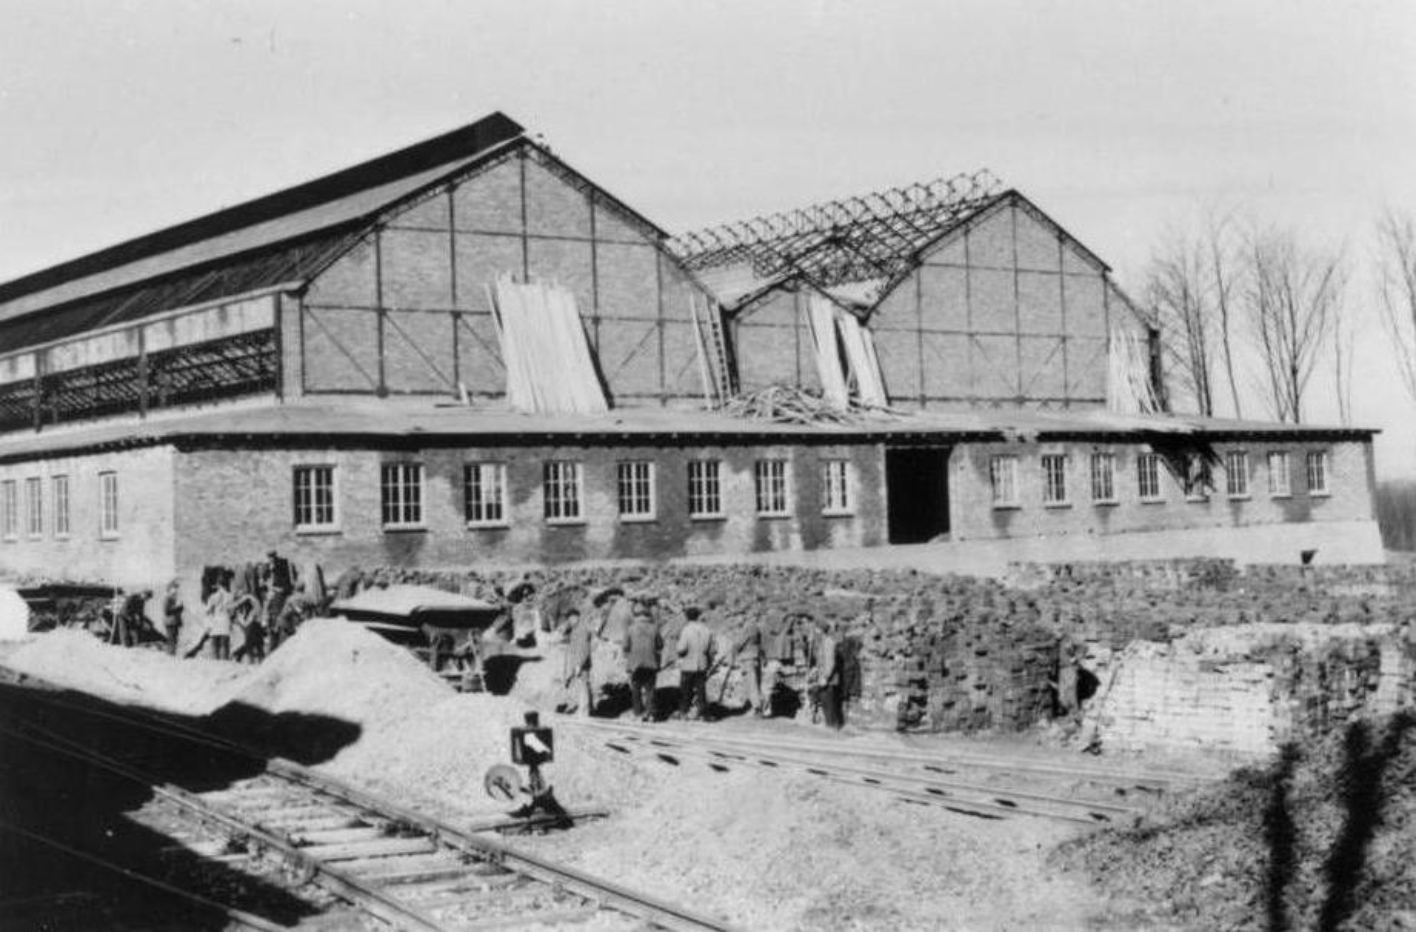 Buchenwald Railway siding at the Gustloff Works II. Inmates working in the background. The two-part roof of a large hall under construction can be seen from the plant. Construction material is piled up in various places.